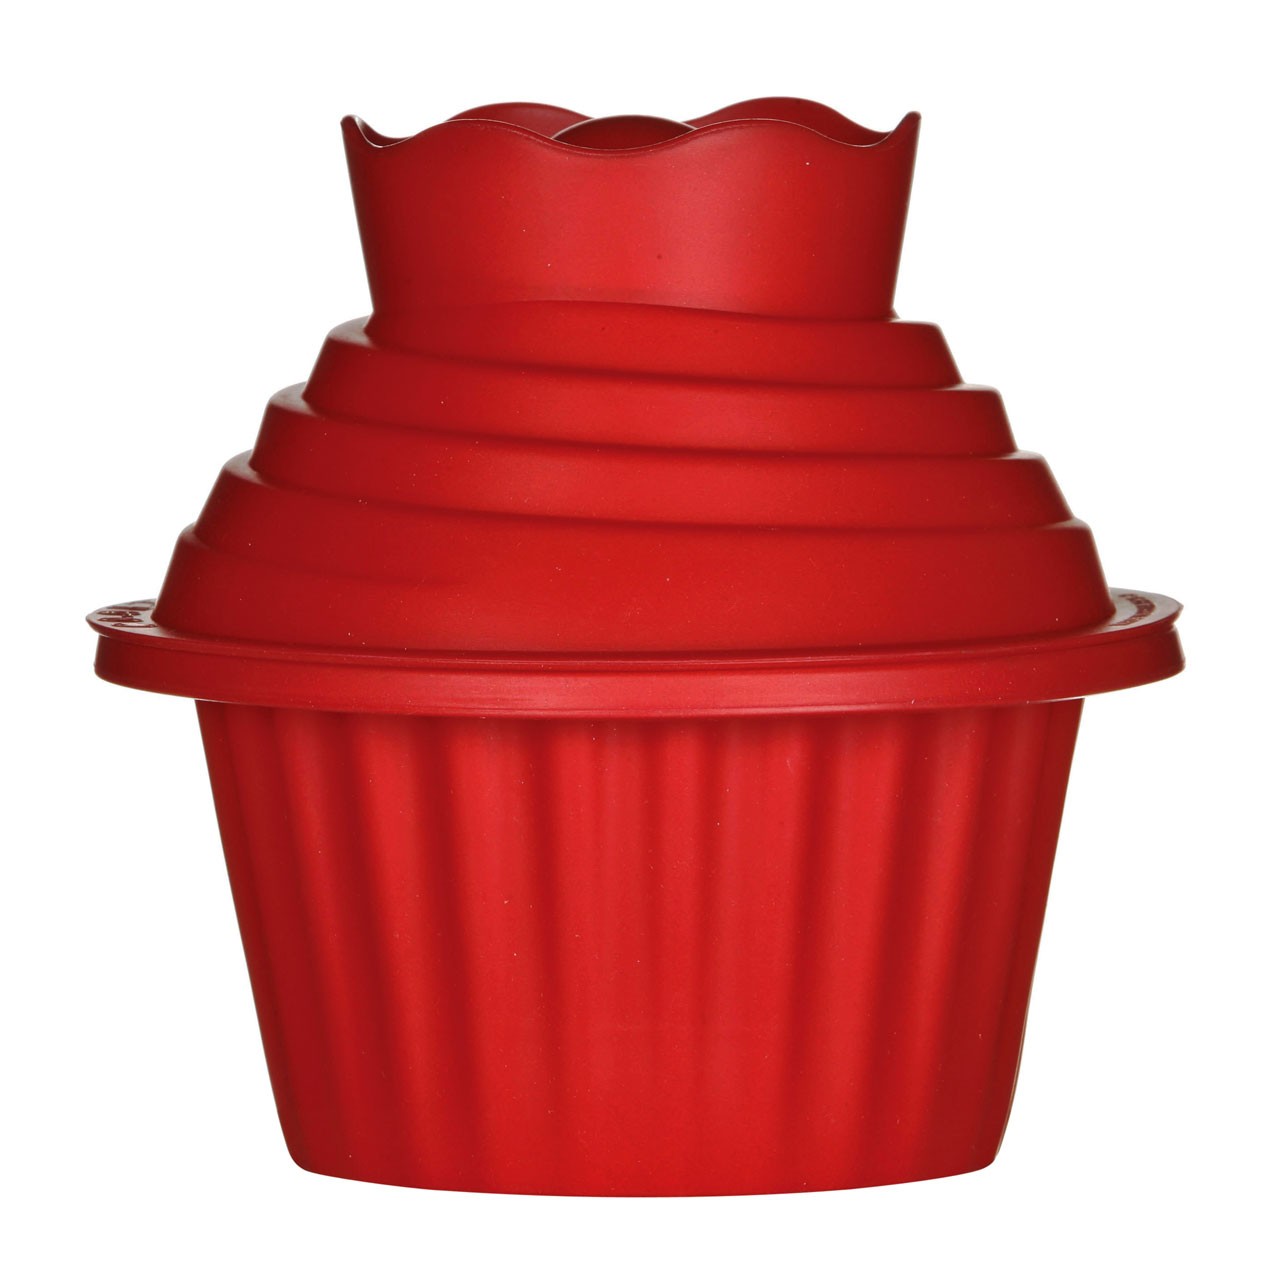 Giant Cupcake Mould, 3 Pieces - Red